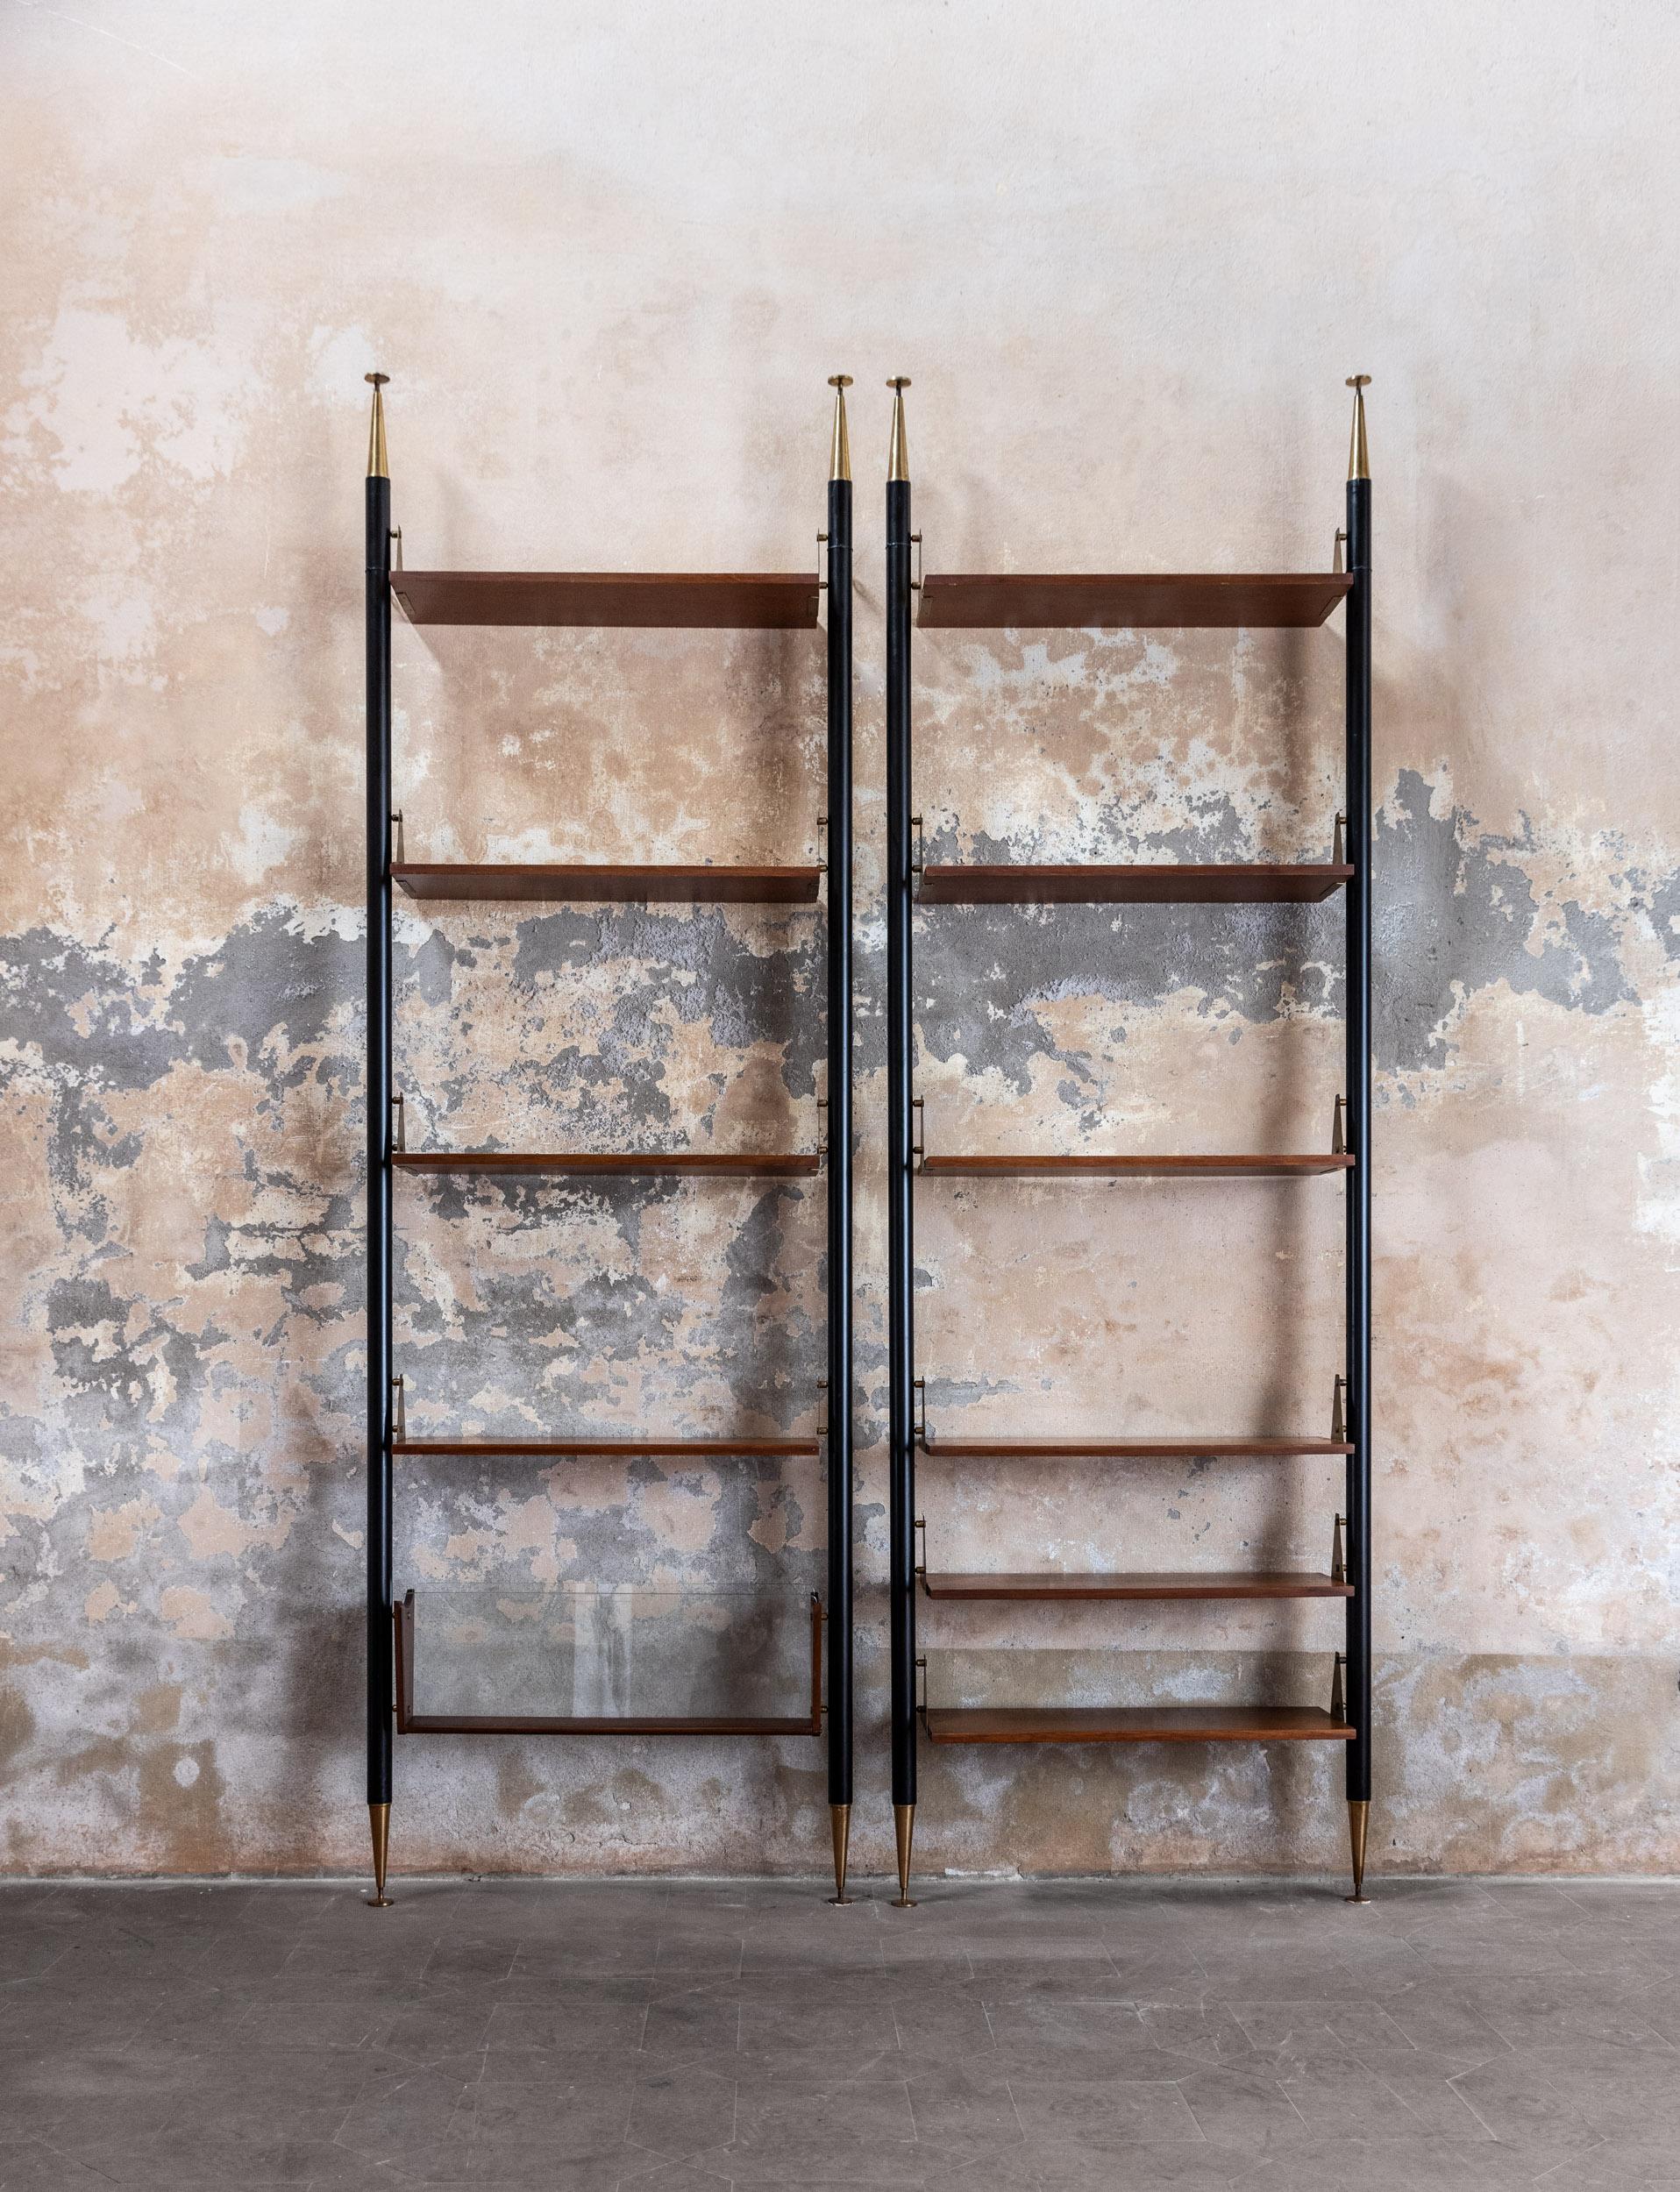 Pair of italian midcentury bookcases attributed to Stildomus.
Elegant black laquered metal and brass legs, wood shelves and one glass magazine rack.
Adjustable shelves.